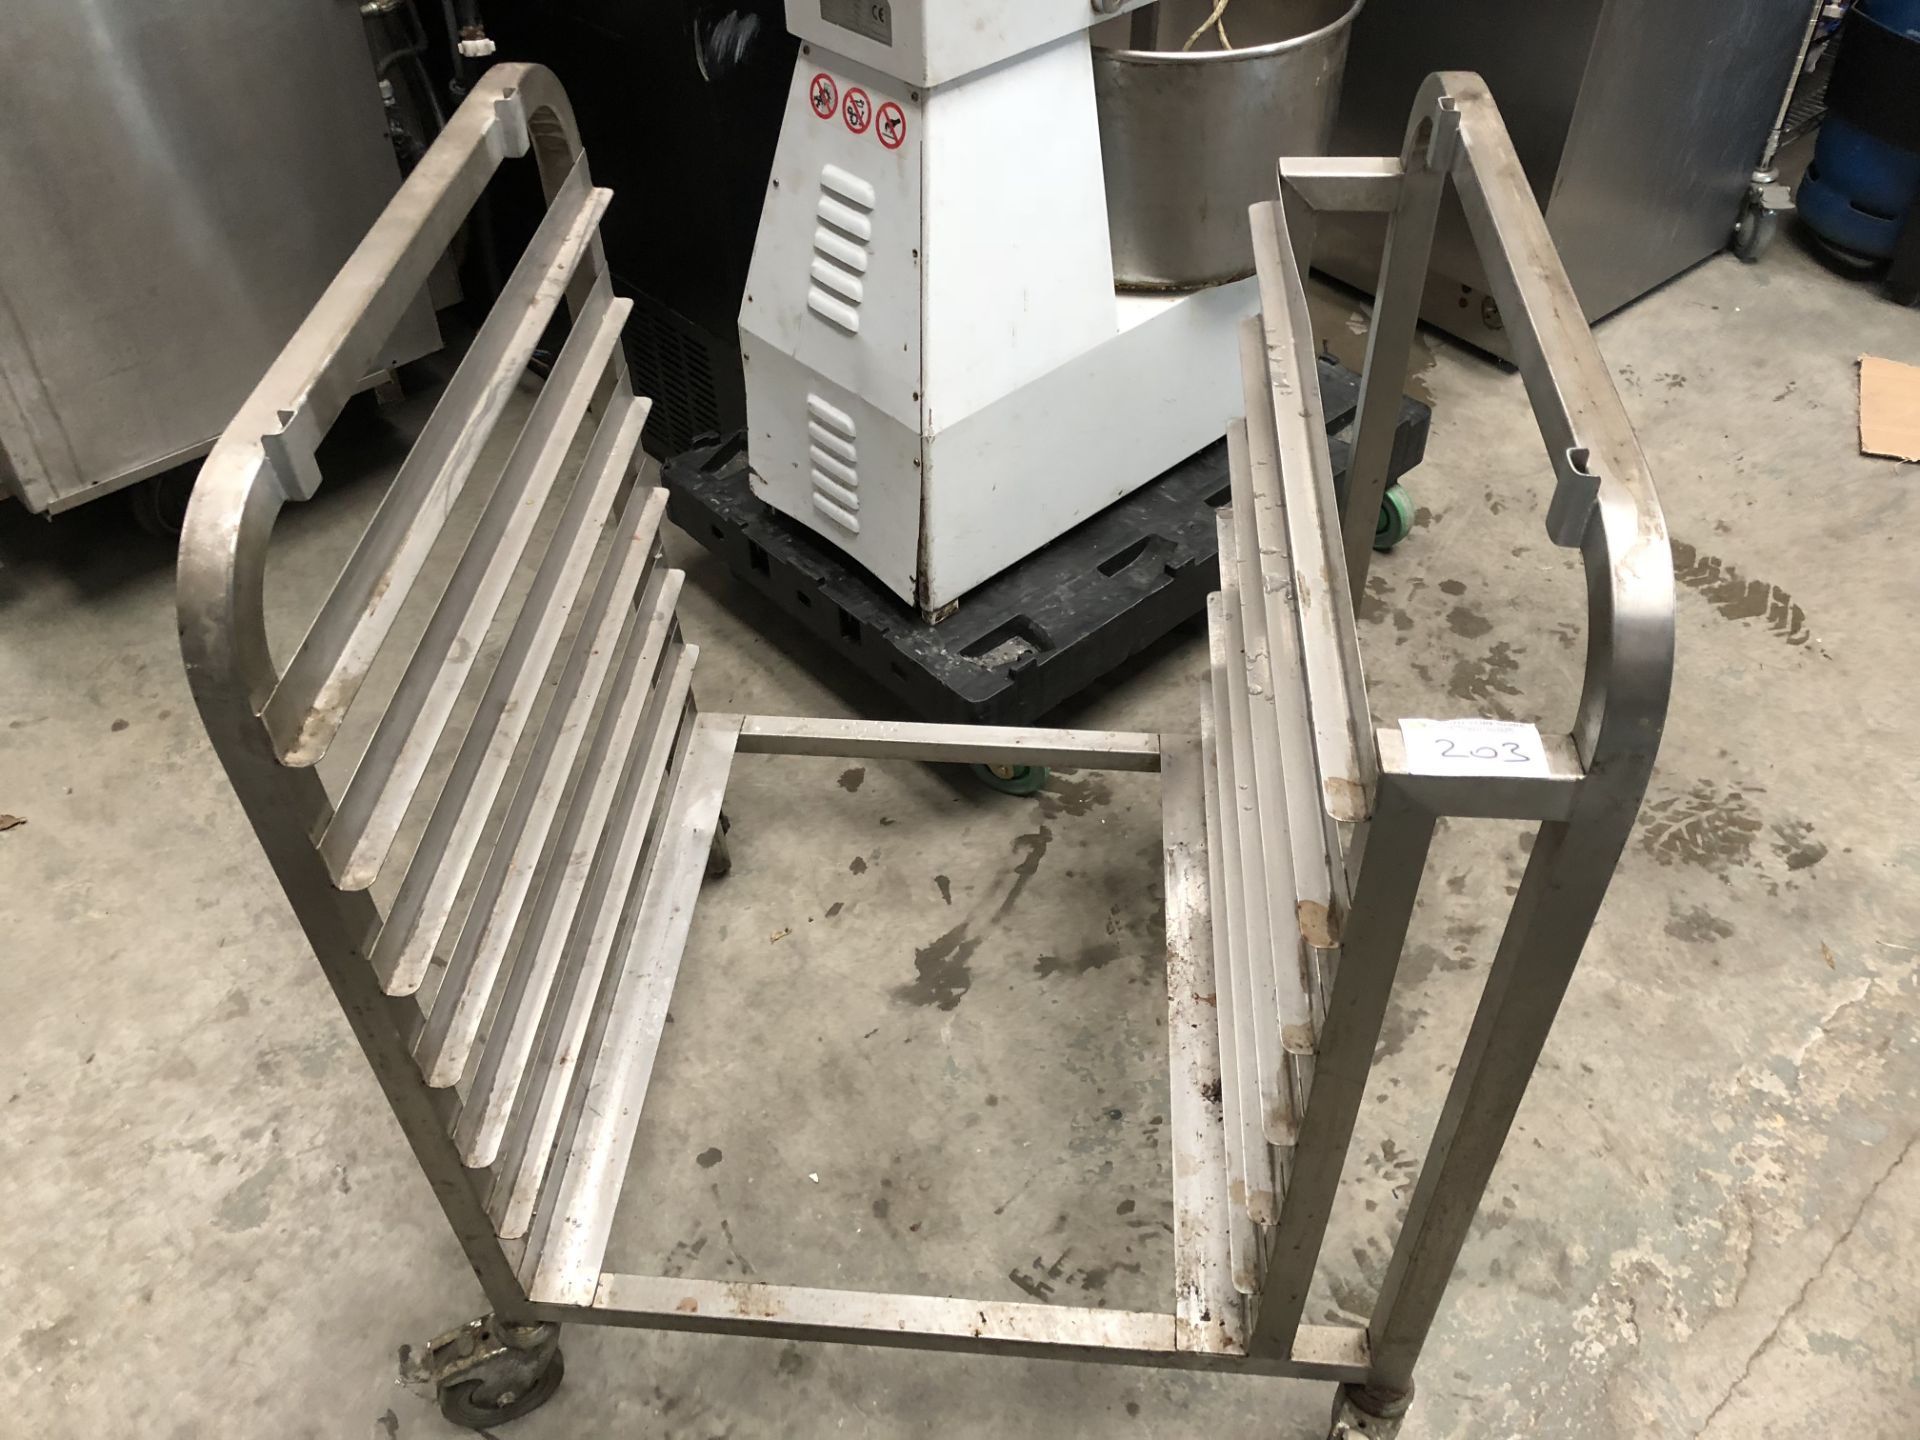 Stainless Steel Tray Holder on Wheels